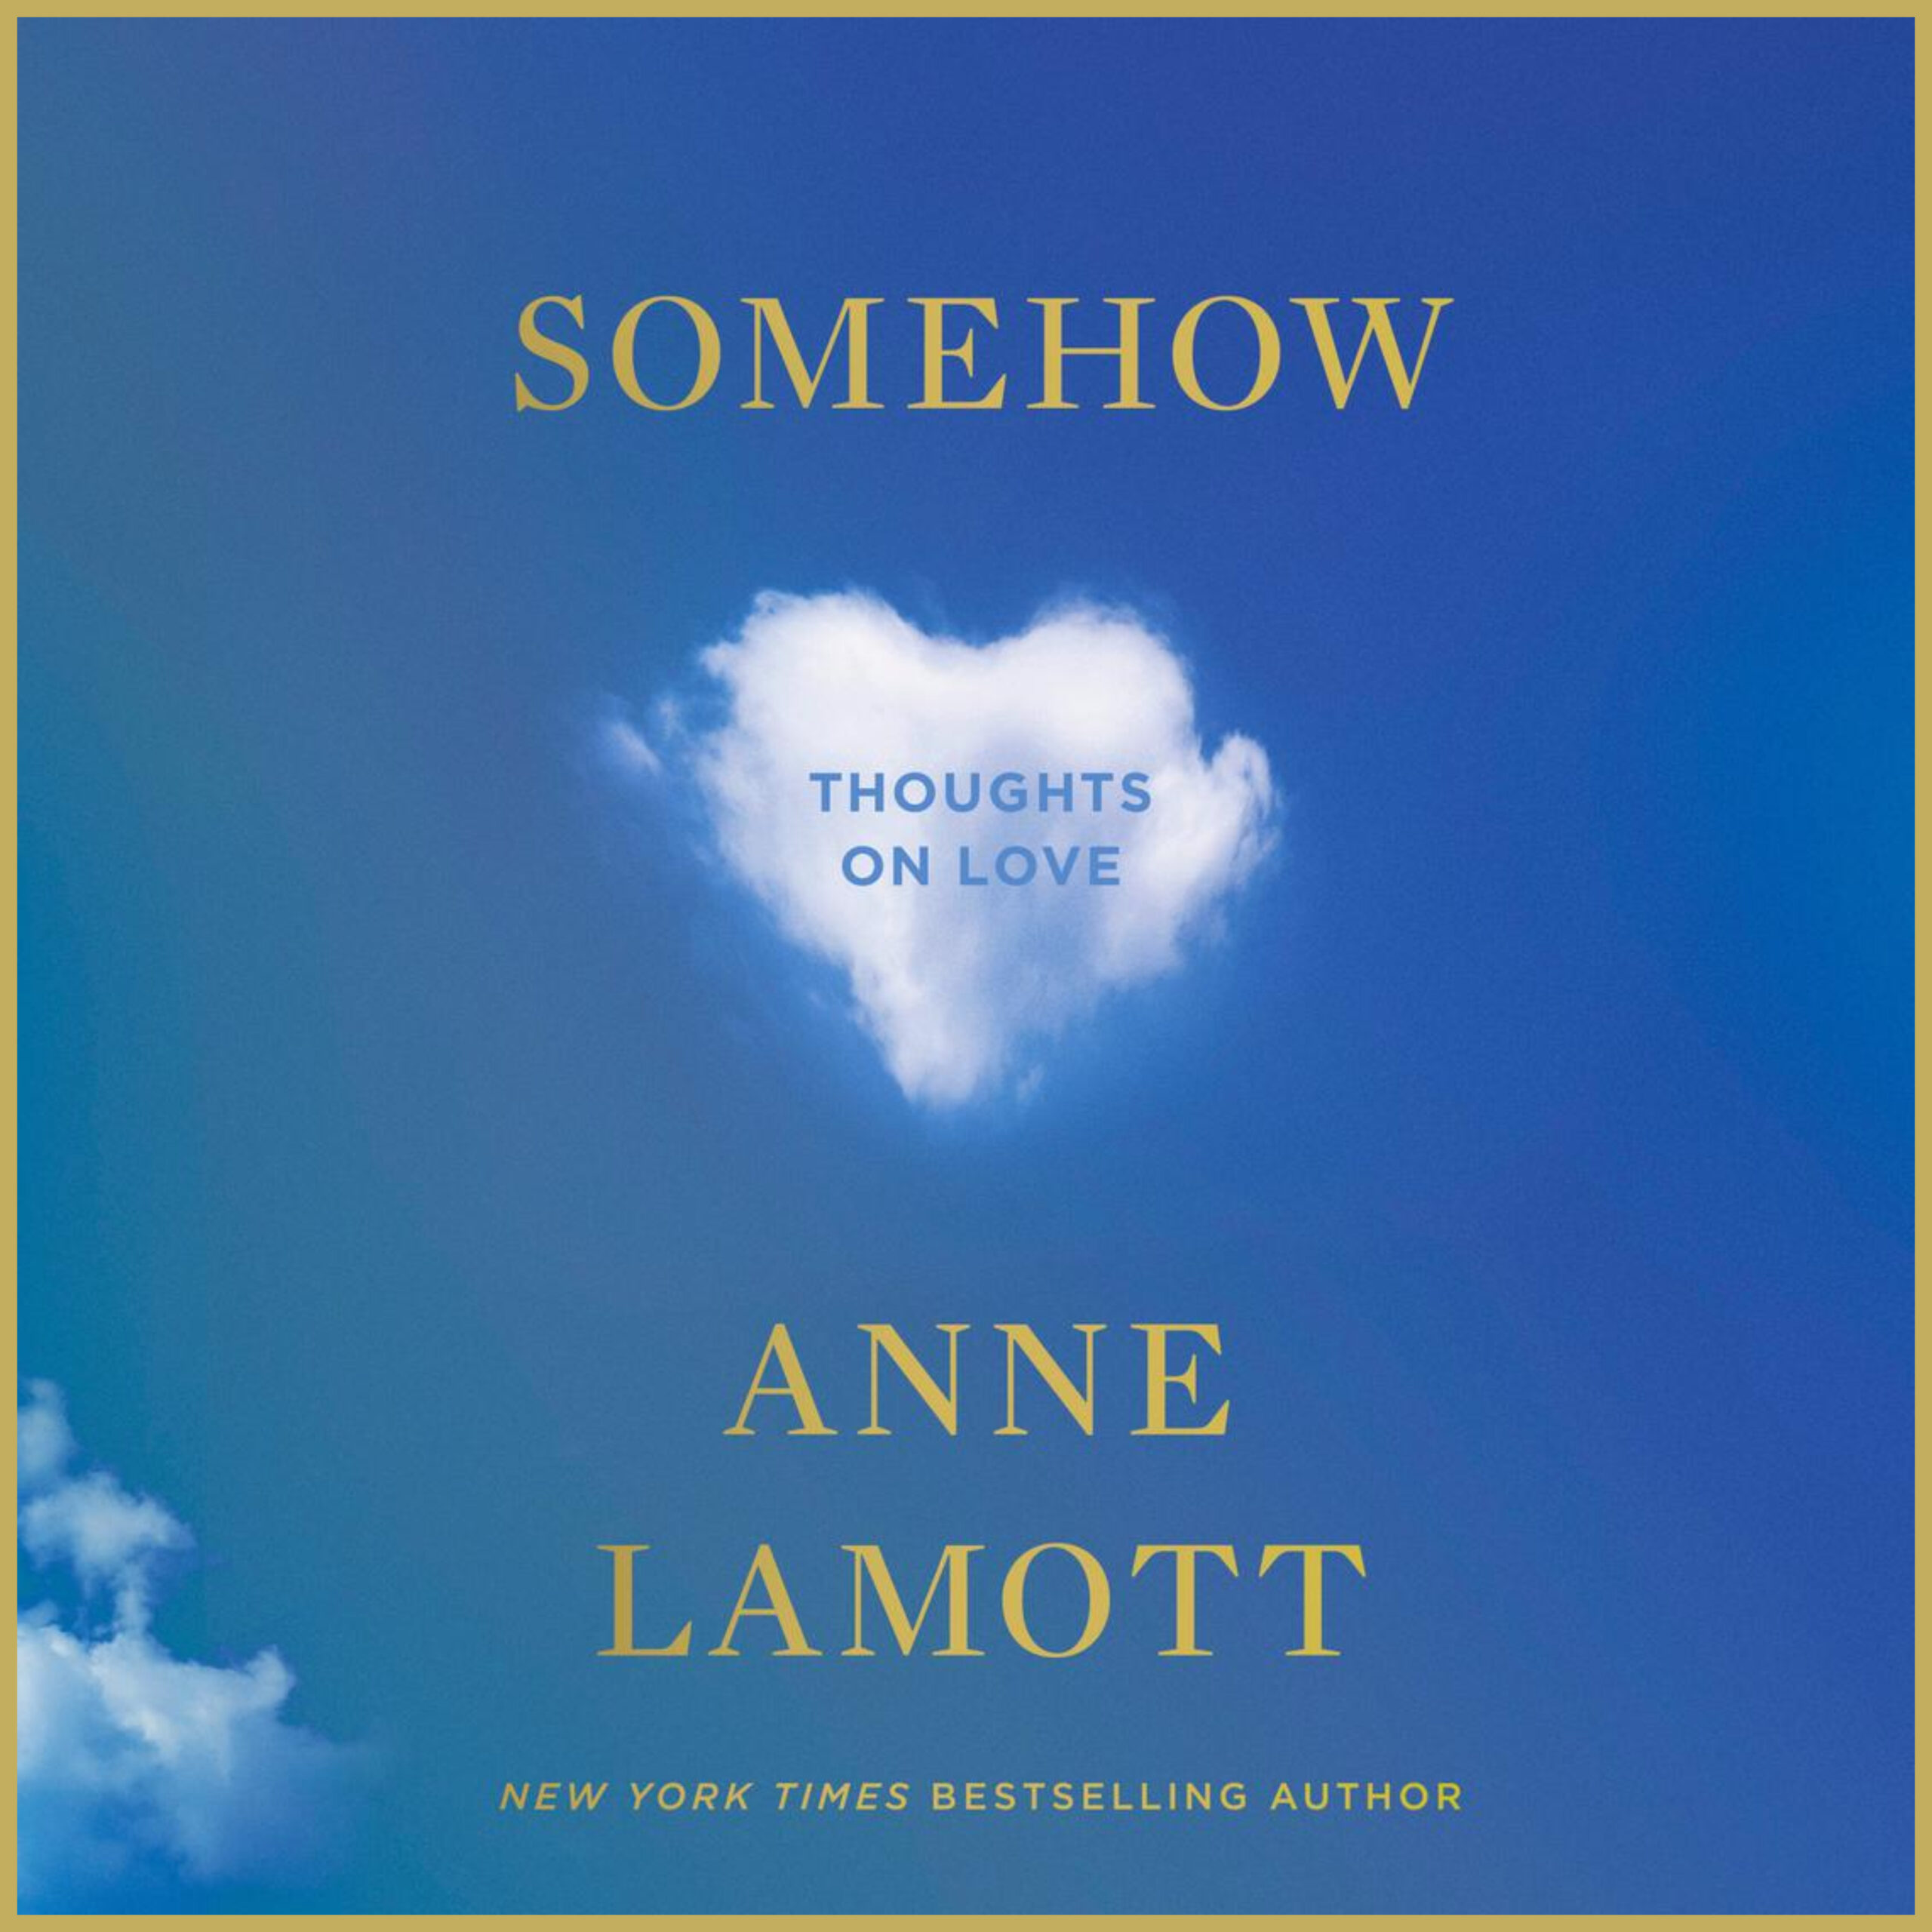 The Book Show | Anne Lamott - Somehow: Thoughts on Love